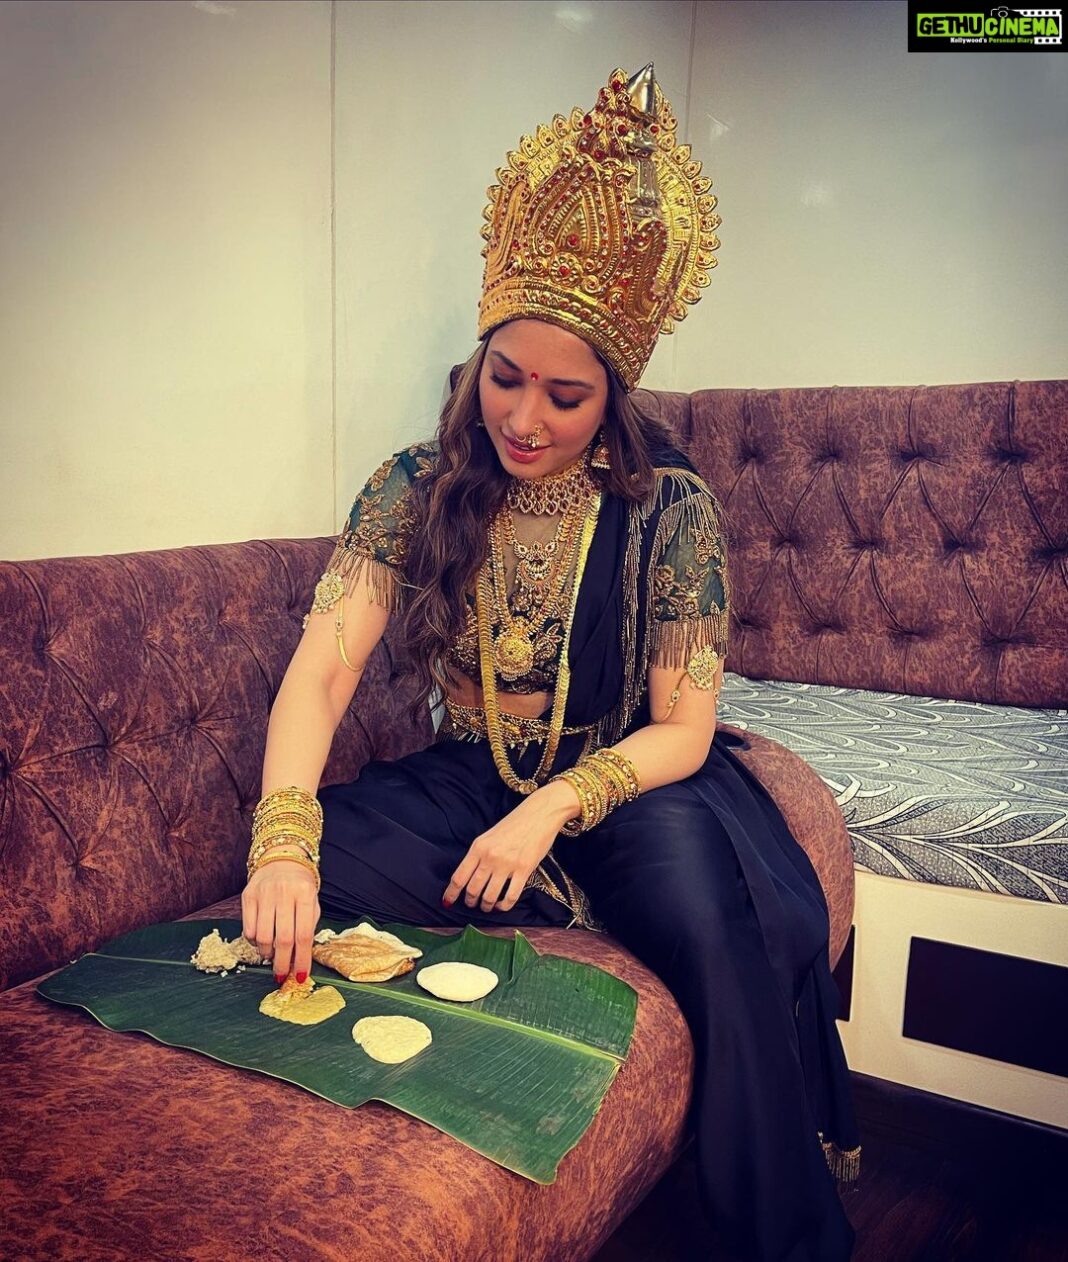 Tamannaah Instagram - I feel like a goddess when I eat on a banana leaf! It’s easy to find, and great for the environment too! Going back to the roots one step at a time! @luke_coutinho #backtotheroots #simpleliving #bananaleaf #yummyinmytummy #healthylifestyle #thenewreligionlifestyle